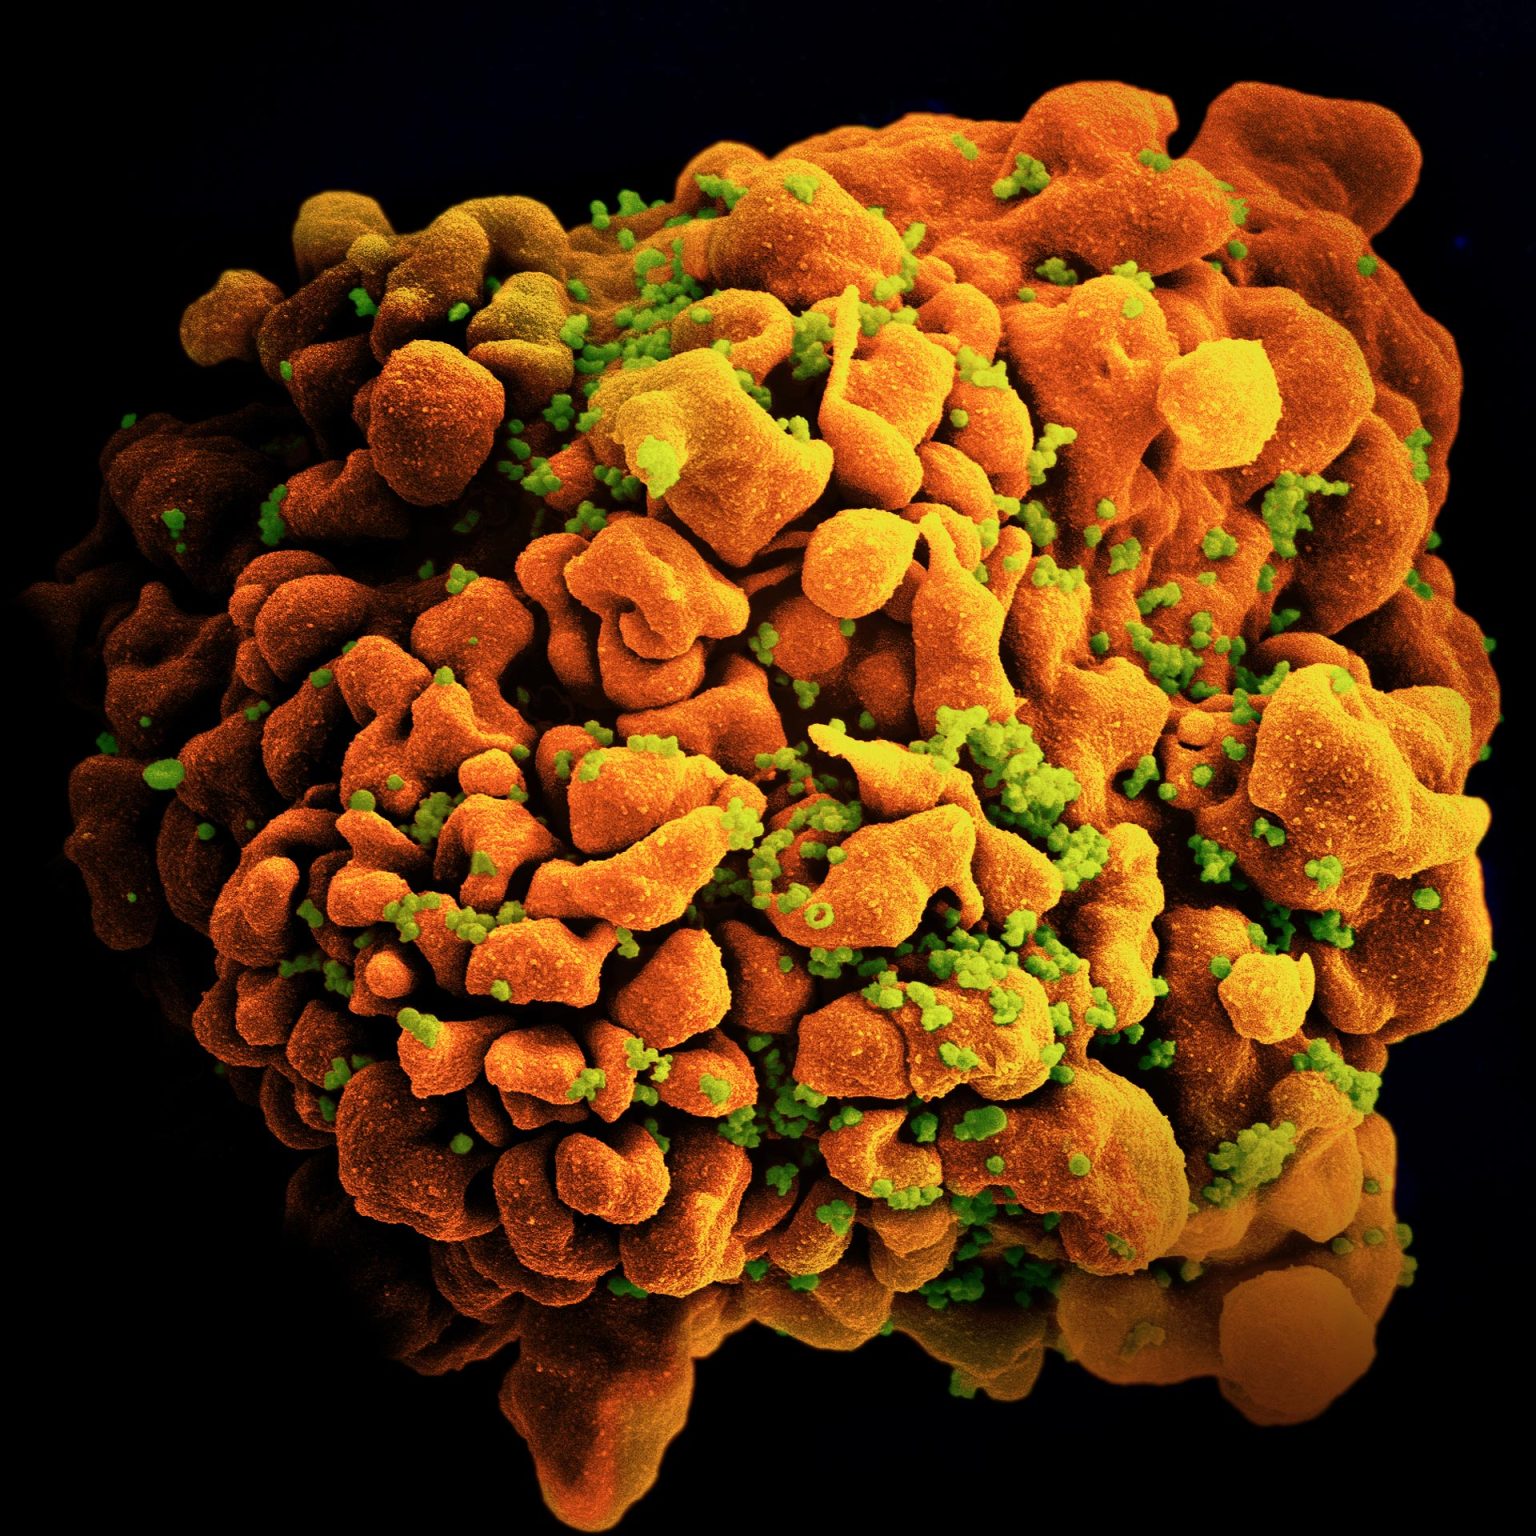 HIV Microscopy in Pictures